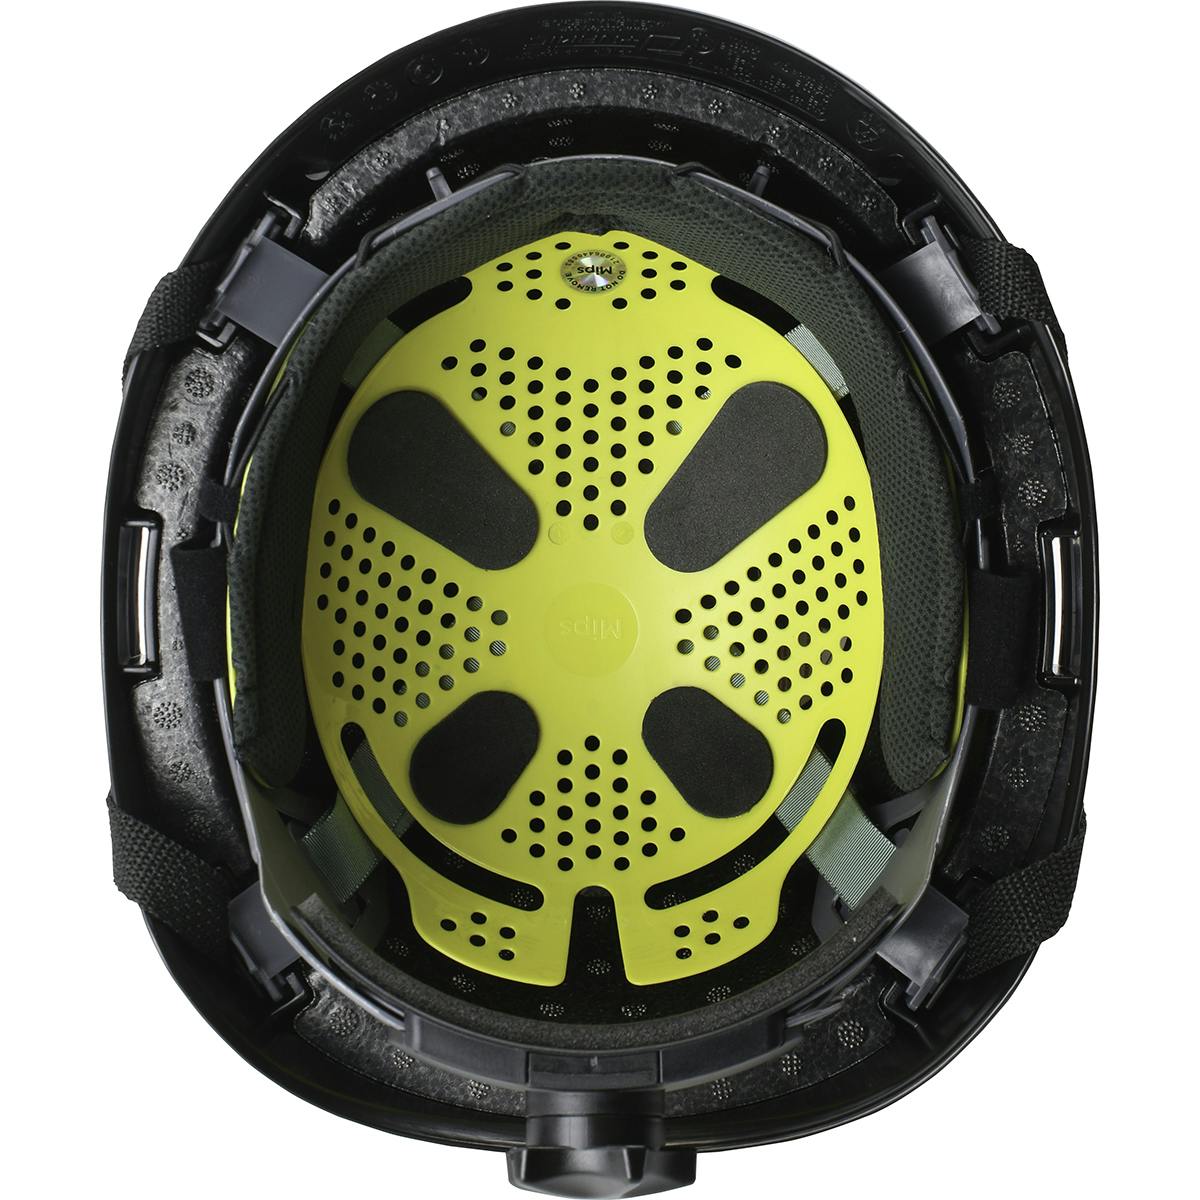 Rocky™ Industrial Climbing Helmet with Mips® Technology, Polycarbonate/ABS Shell, Hi-Density Foam Impact Liner, Nylon Suspension, Wheel Ratchet Adjustment and 4-Point Chin Strap (280-HP142RM)_4